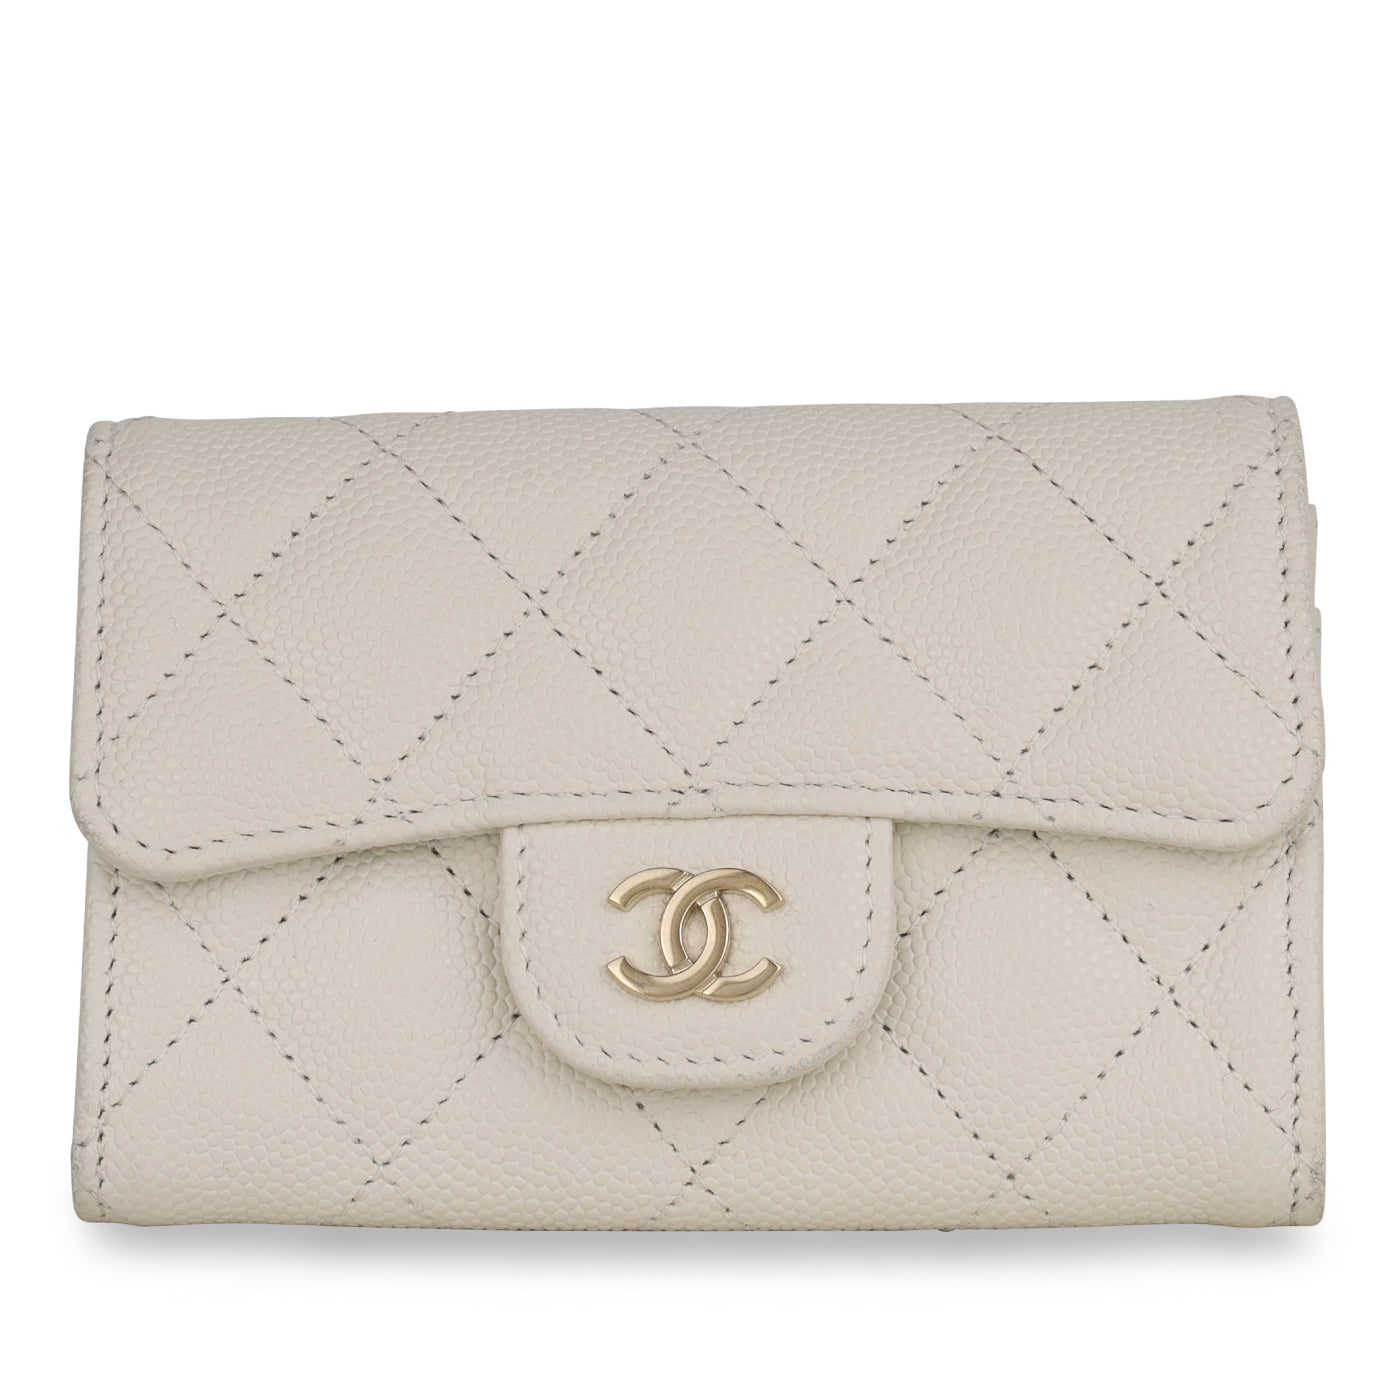 CHANEL White Wallets for Women for sale